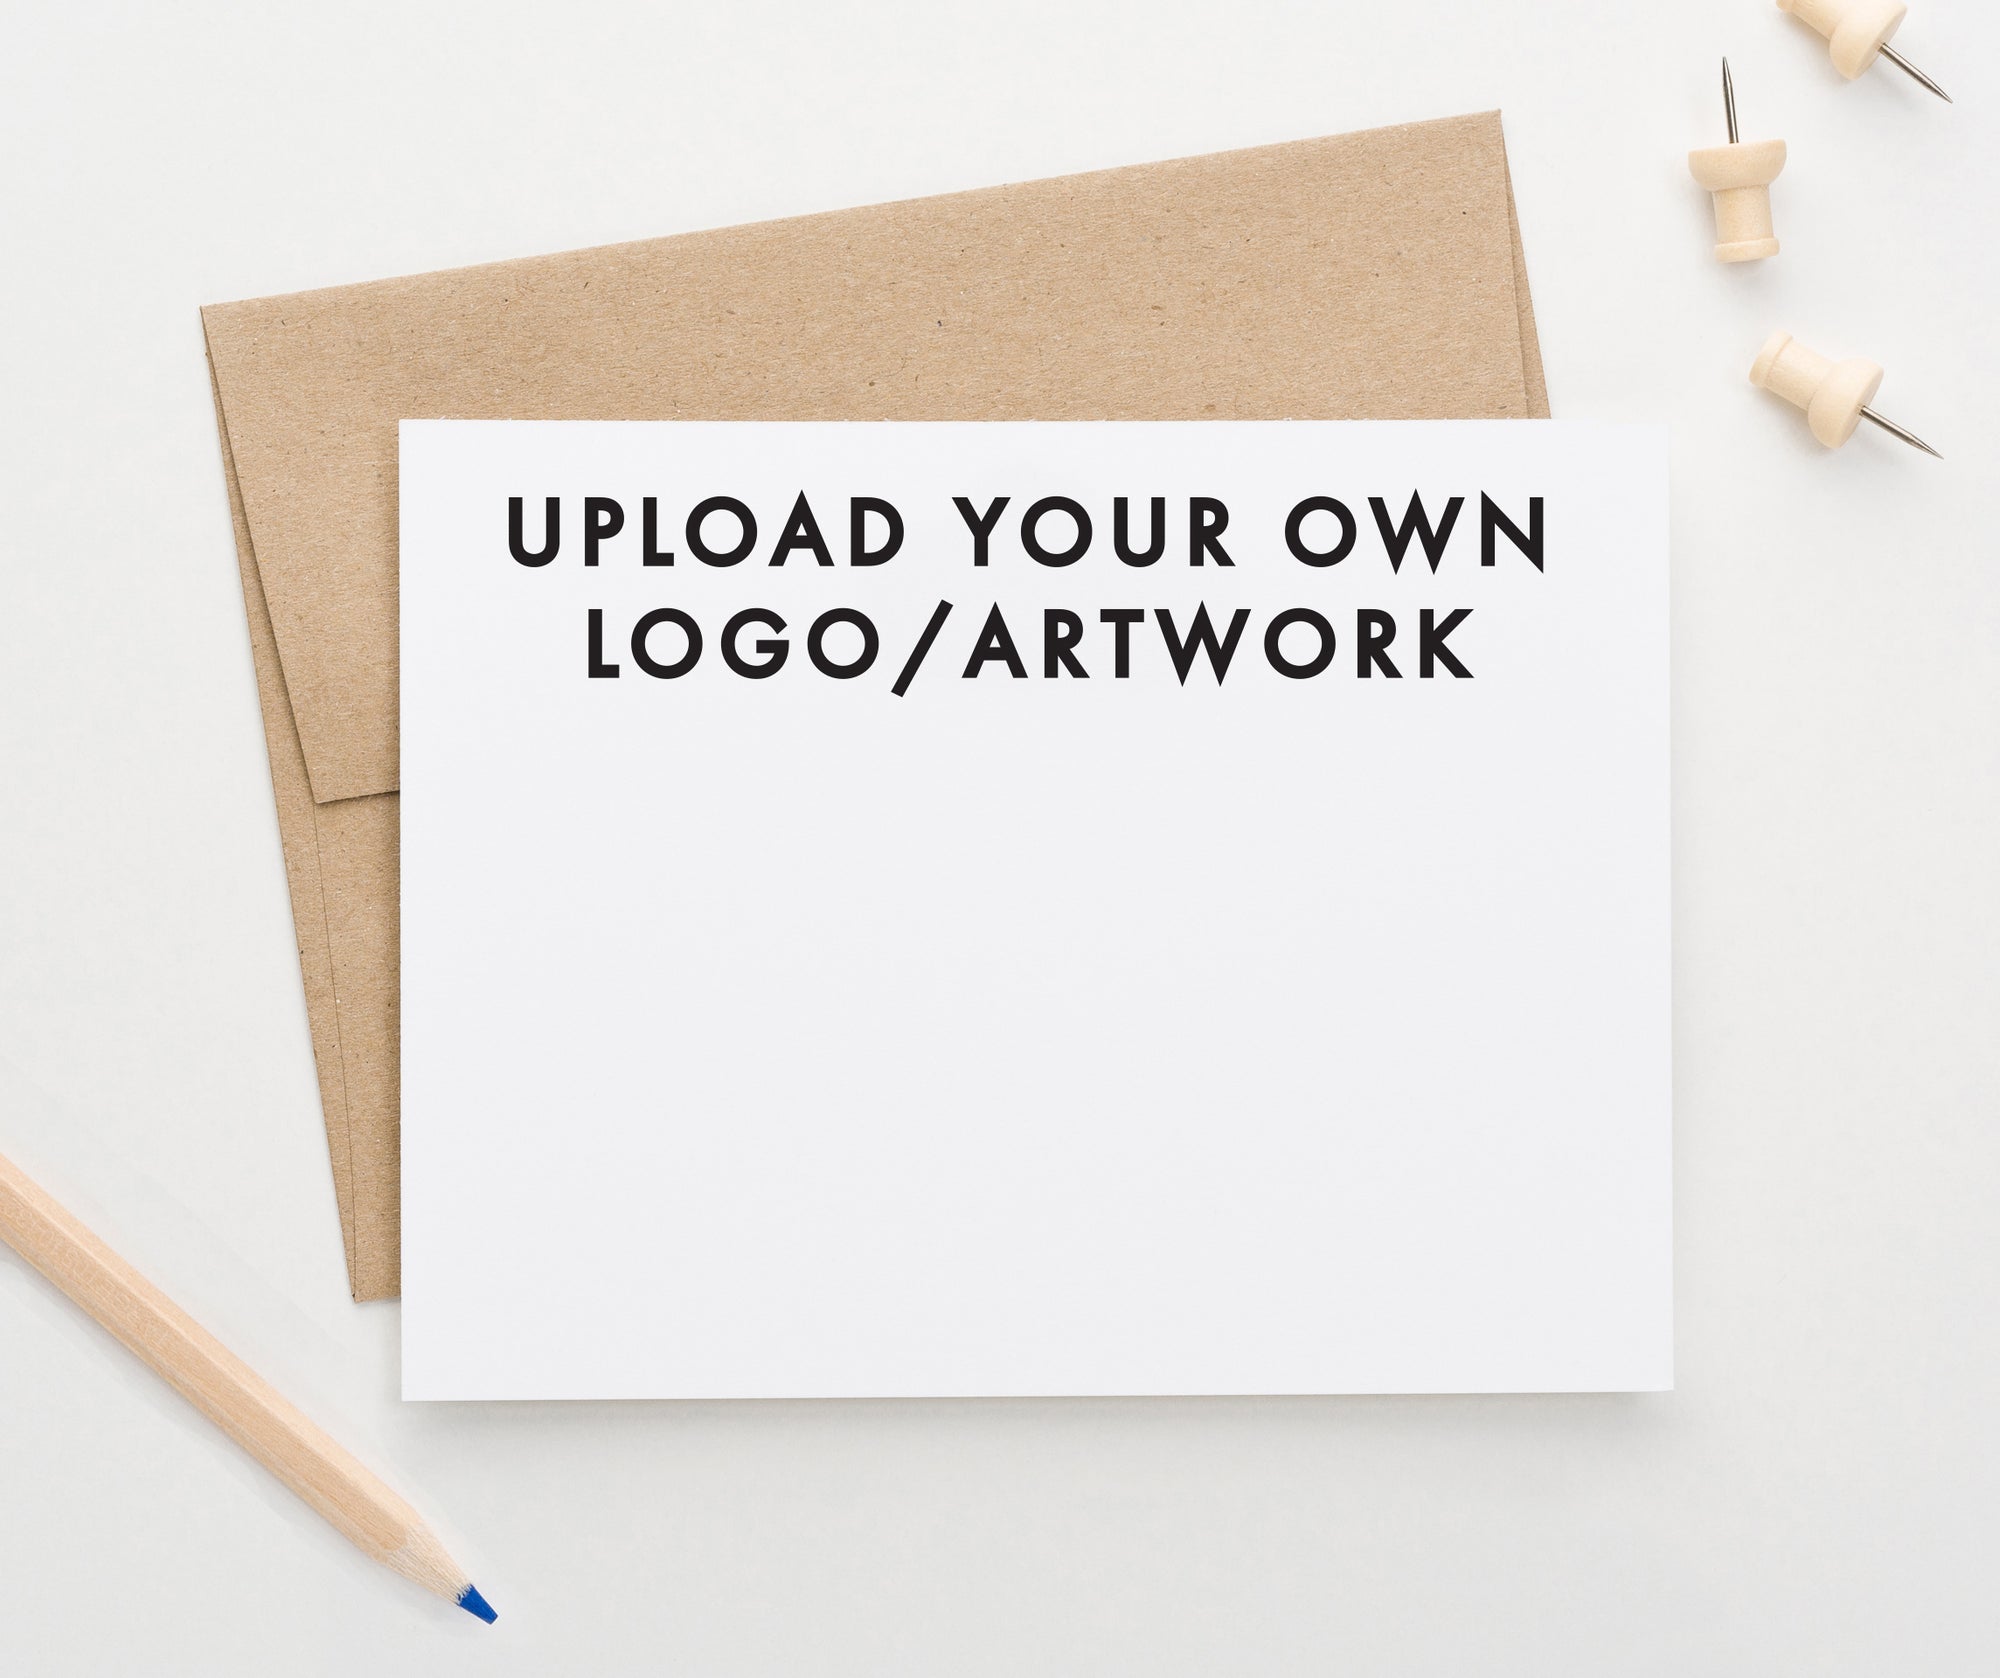 Upload Your Own Logo or Artwork, NOTE CARDS, Custom Text/Font Note Cards, Your Choice of Flat or Folded